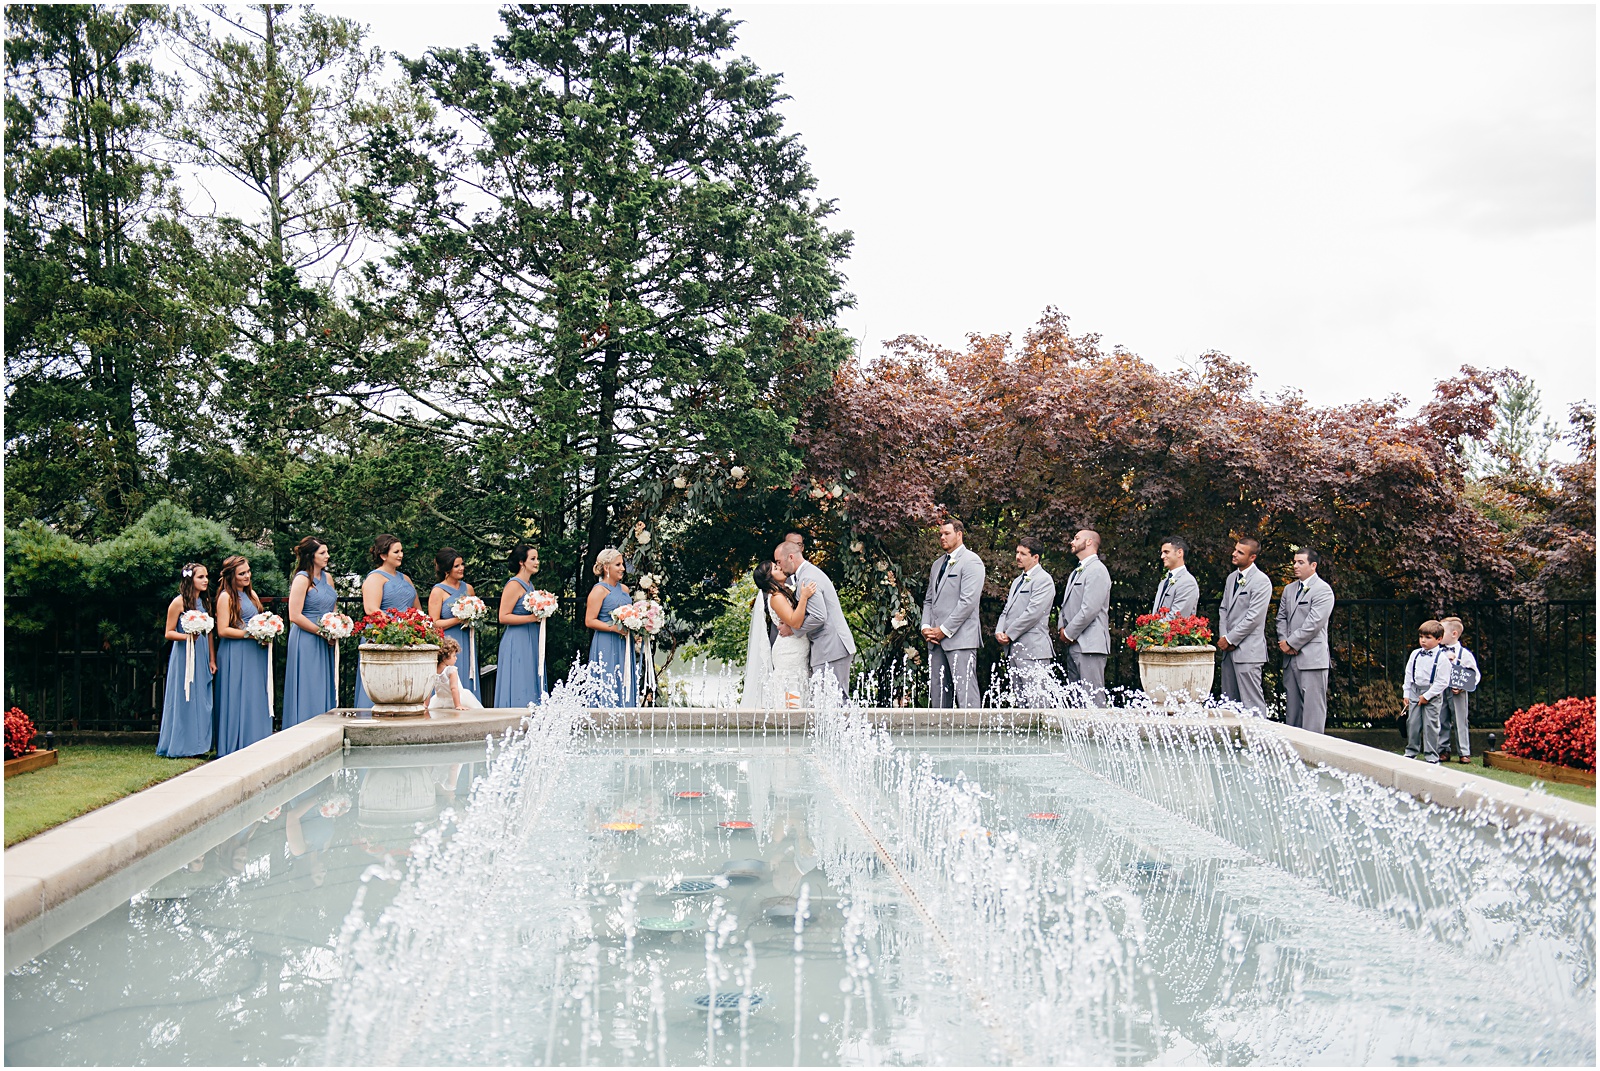 Amber Lowe Photo,Crescent Bend,Knoxville,Knoxville Photographer,Knoxville Wedding Photographer,University of Tennessee Football,